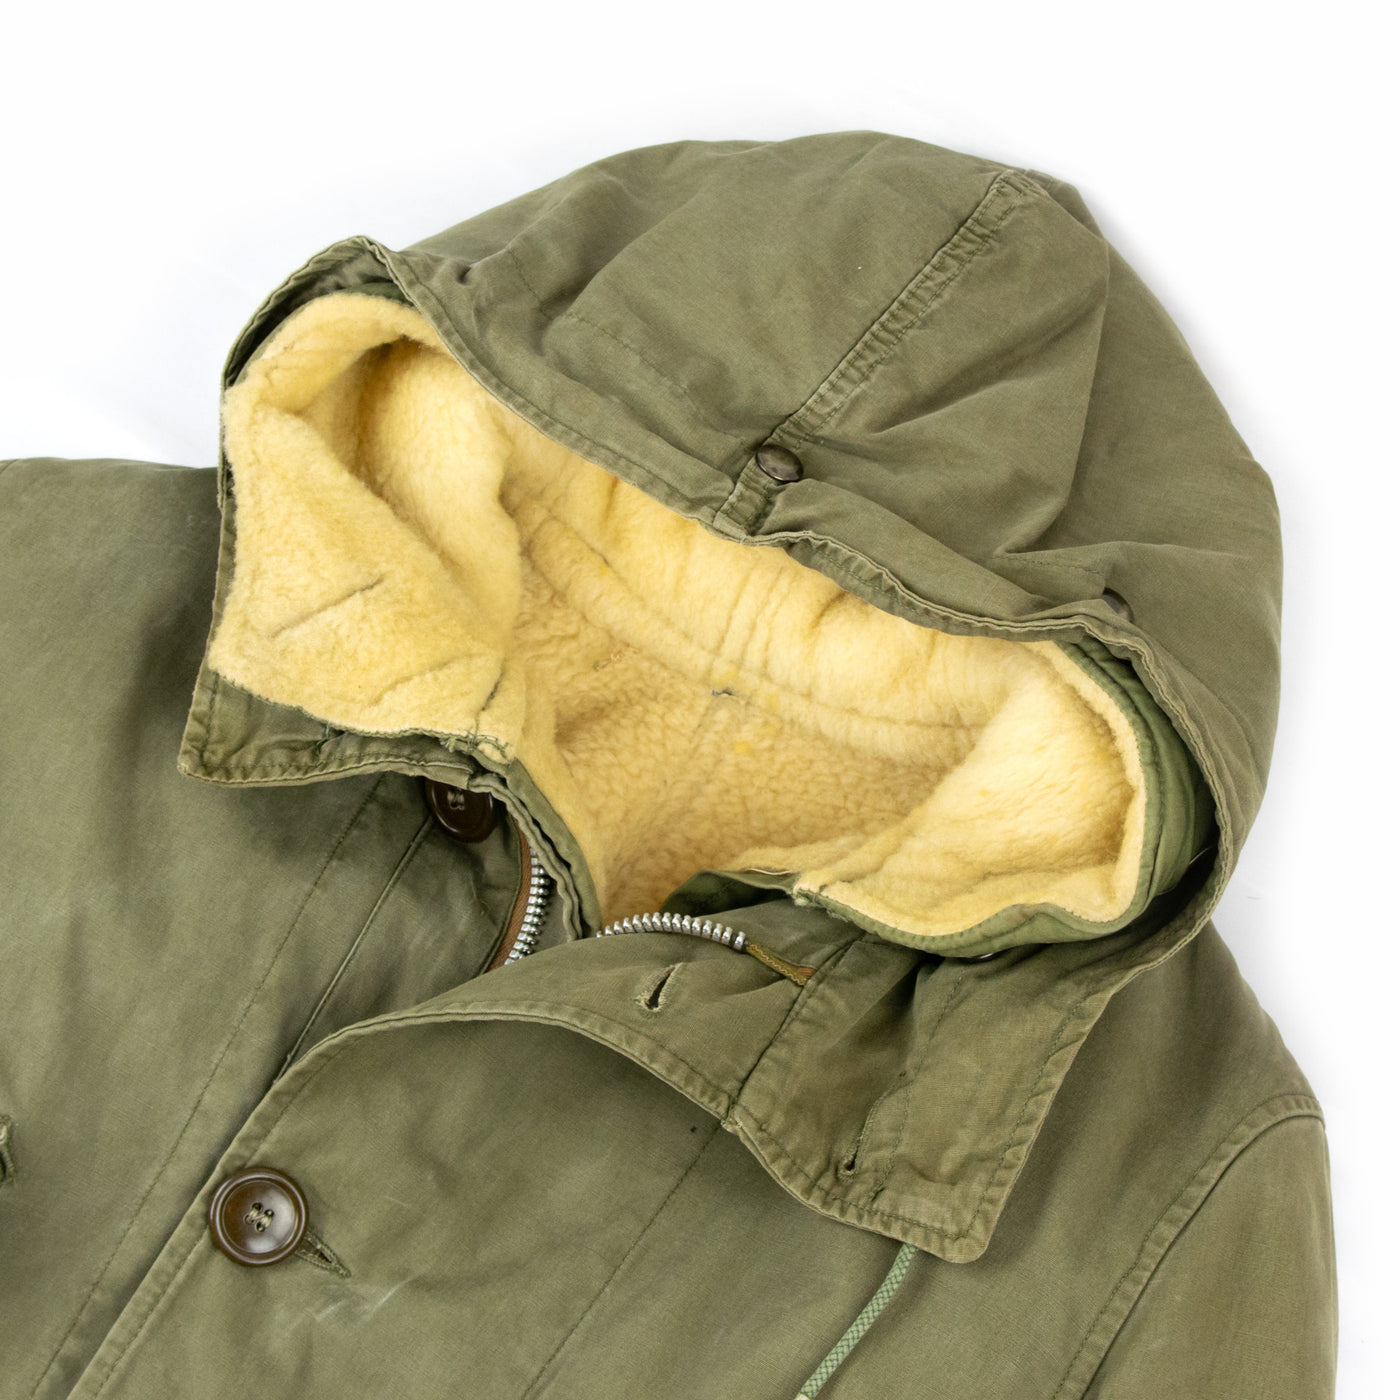 Vintage 1950s US Army Air Force M-47 Military Parka with Detachable Pile Liner - S Hood